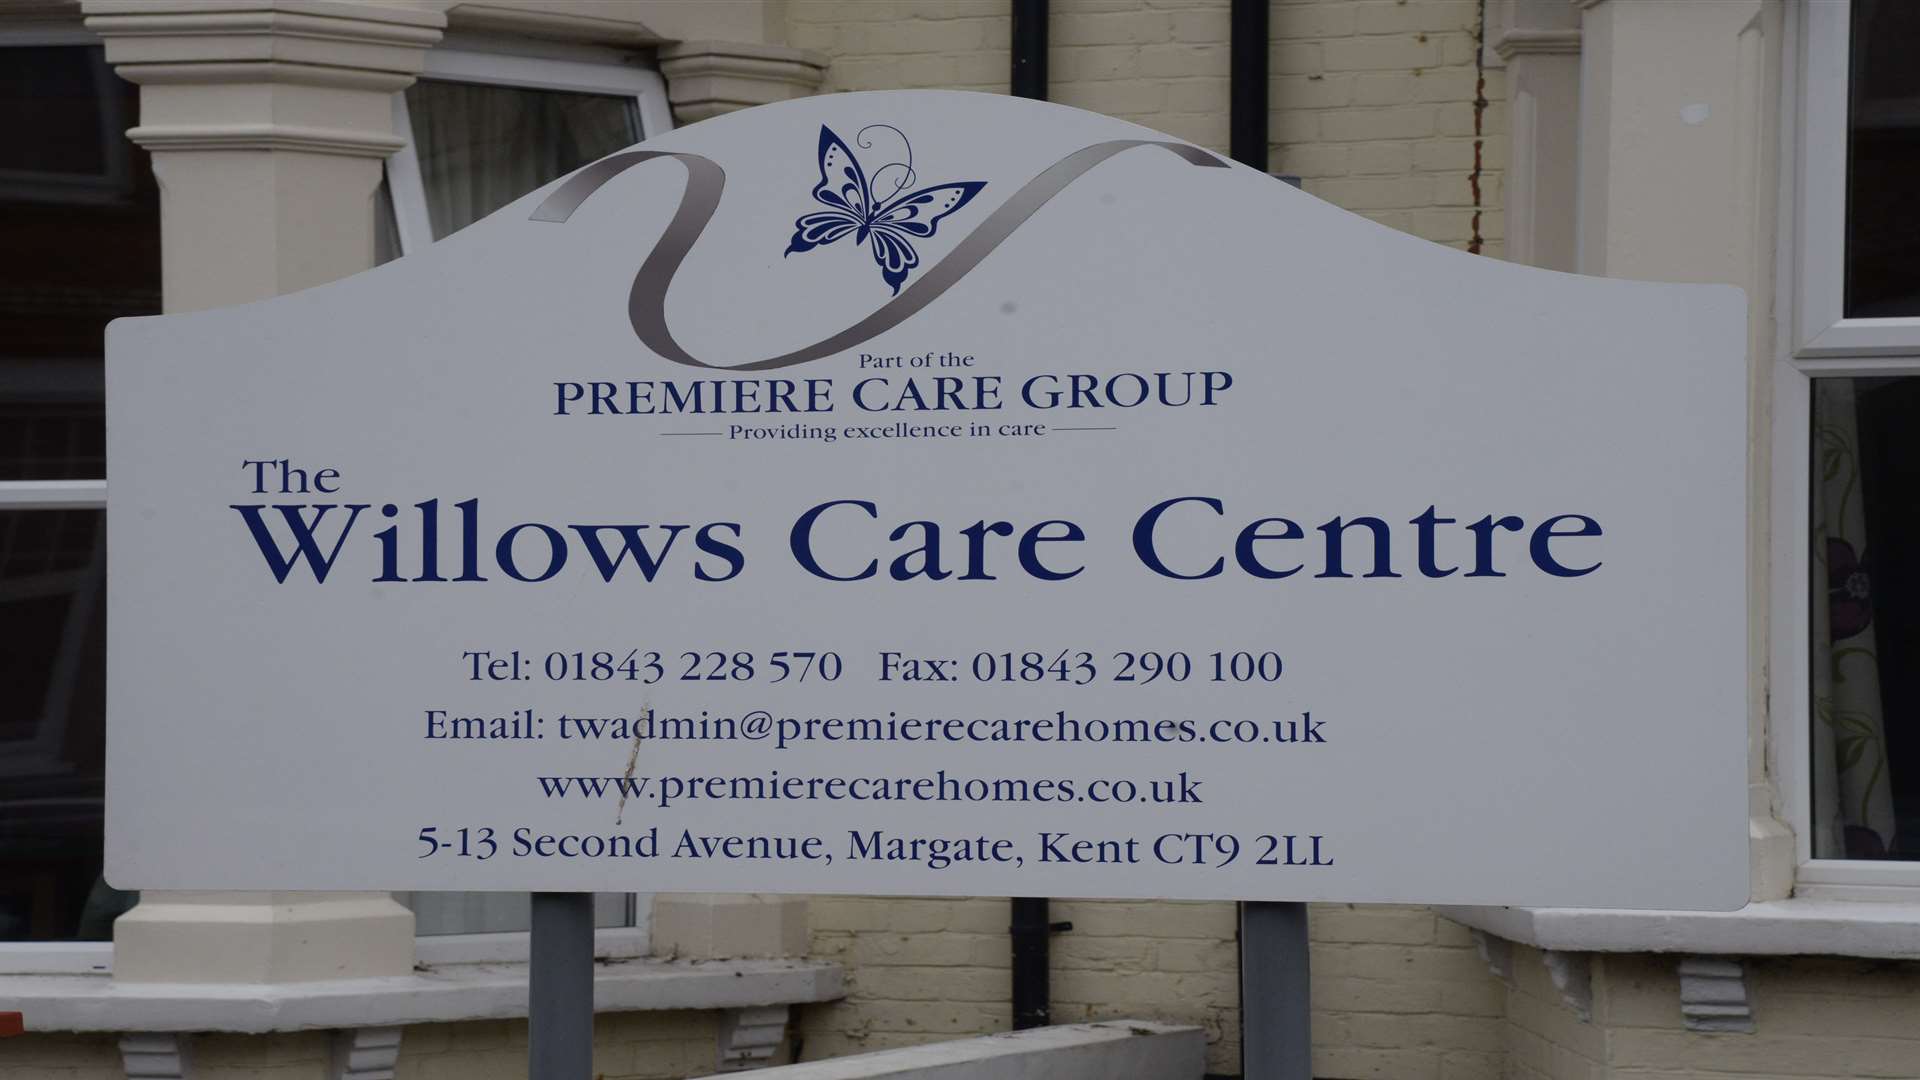 The Willows Care Home has been put into special measures